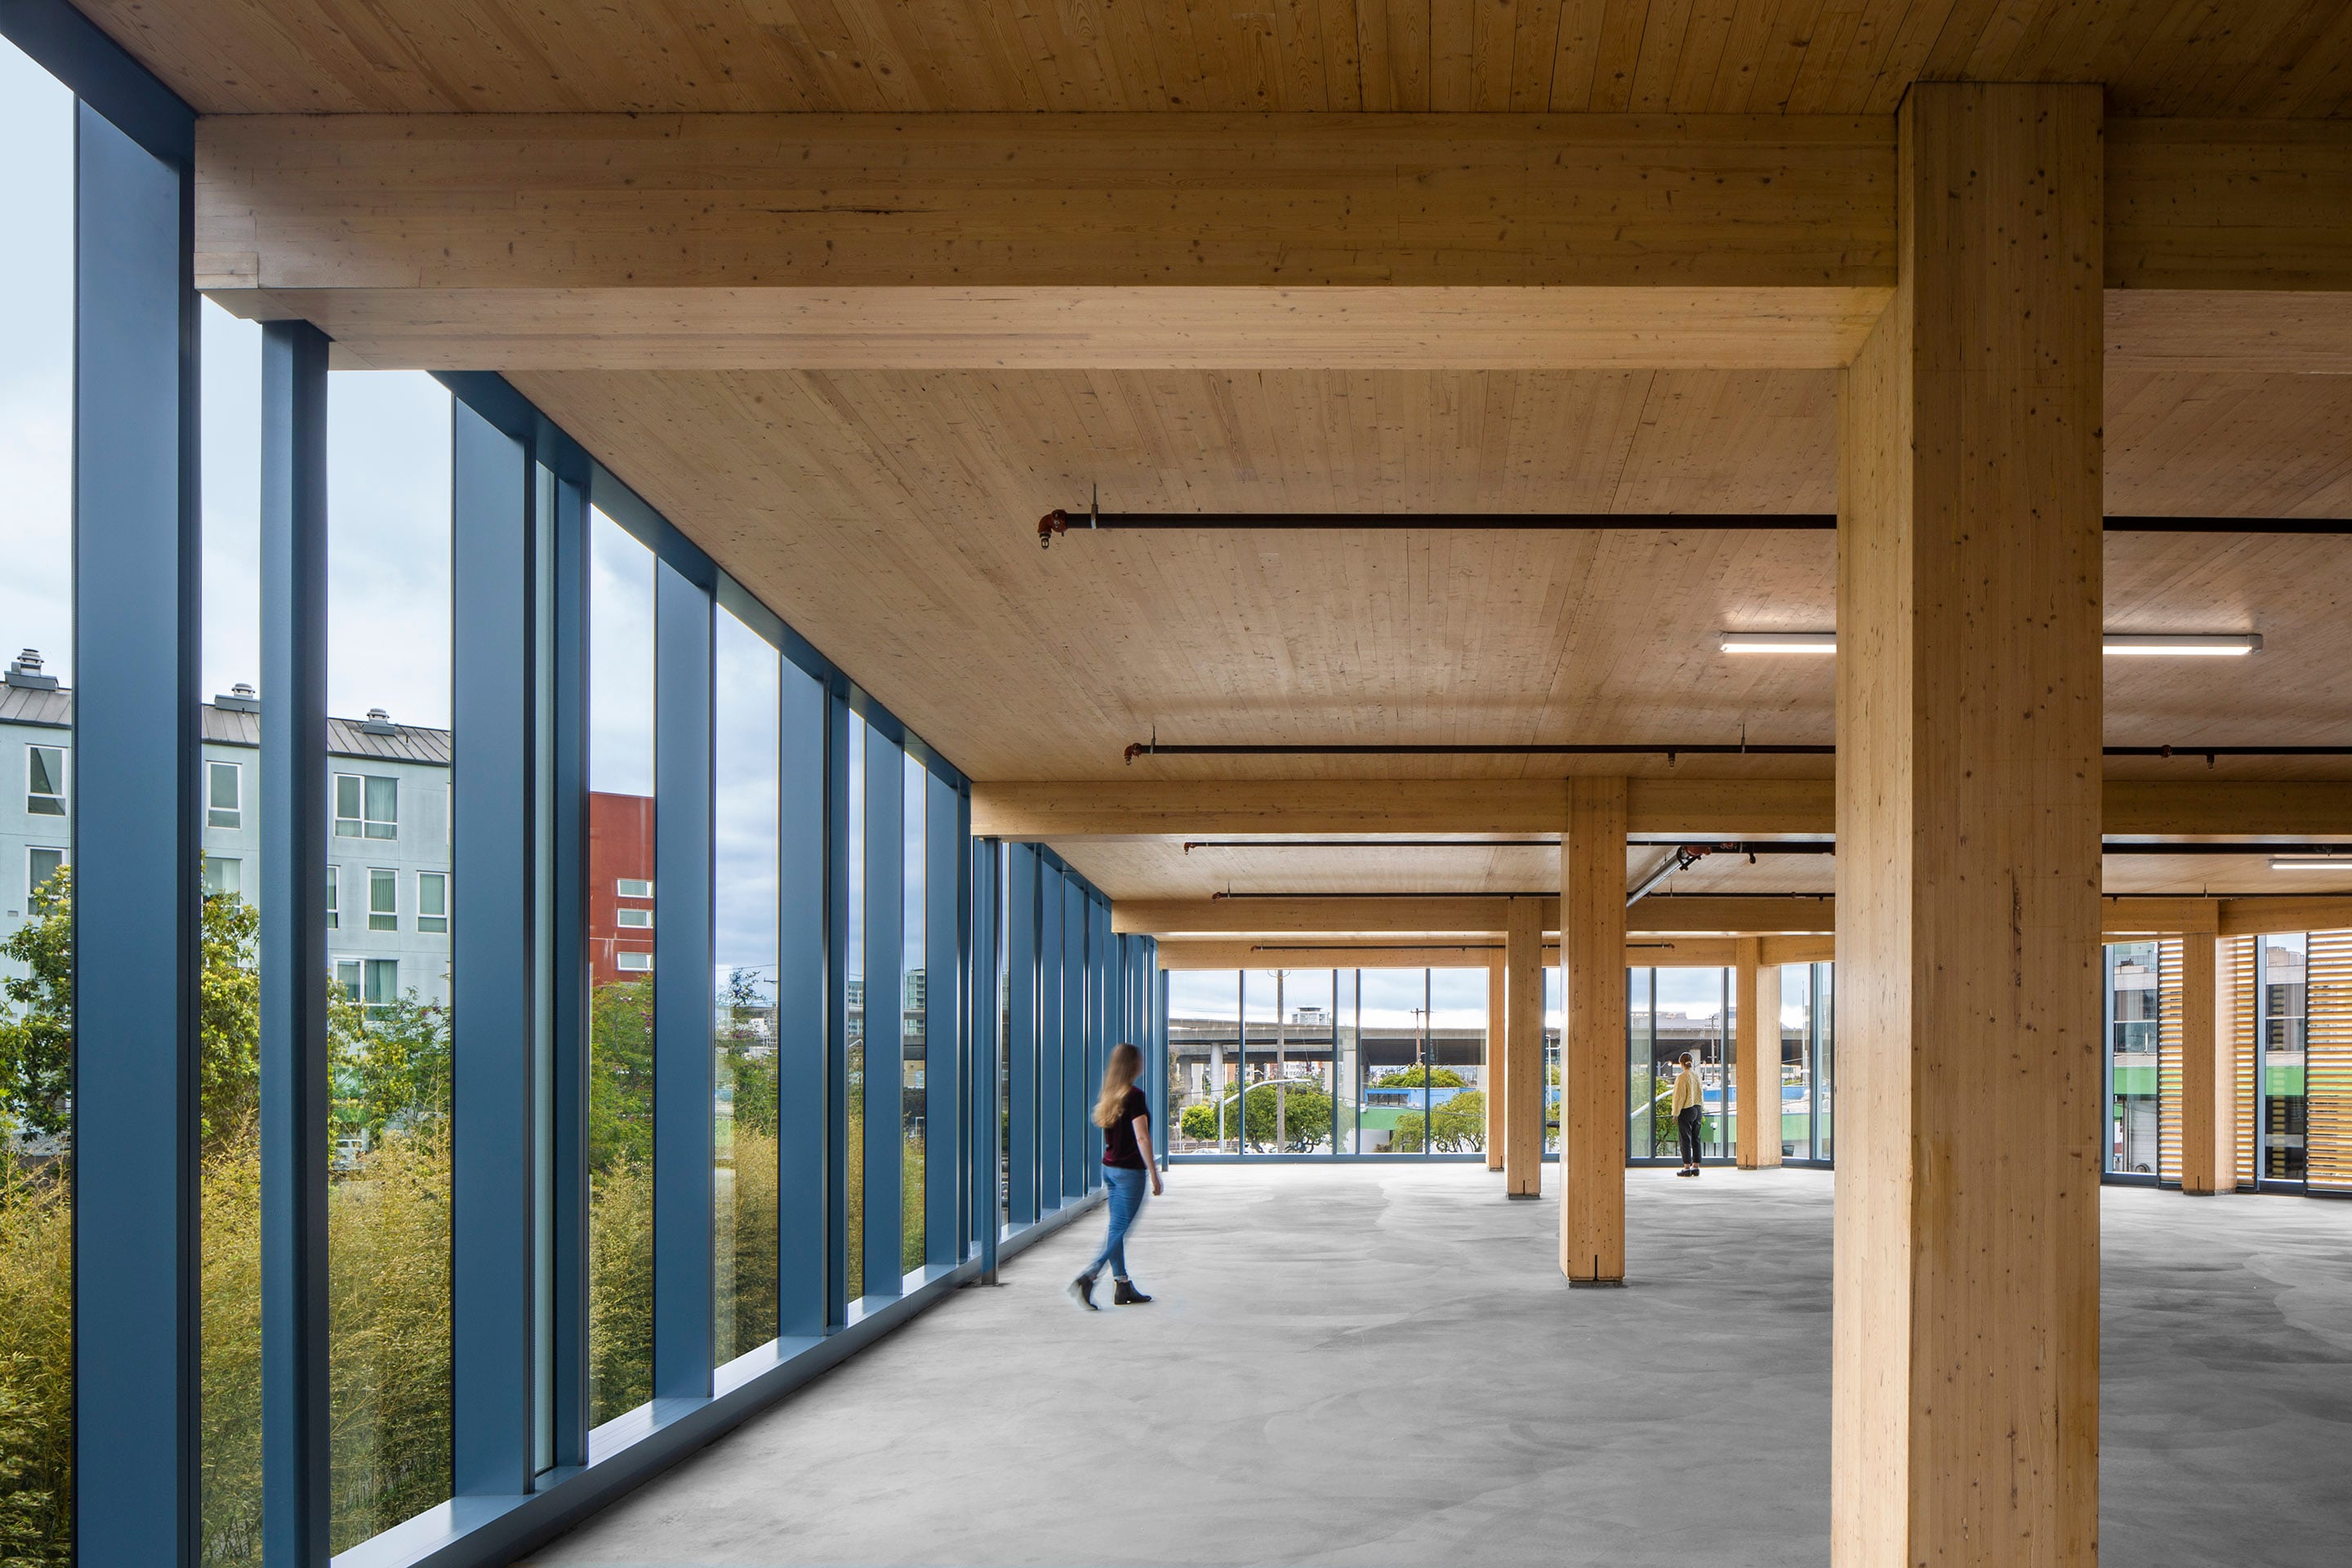 Why choose mass timber?